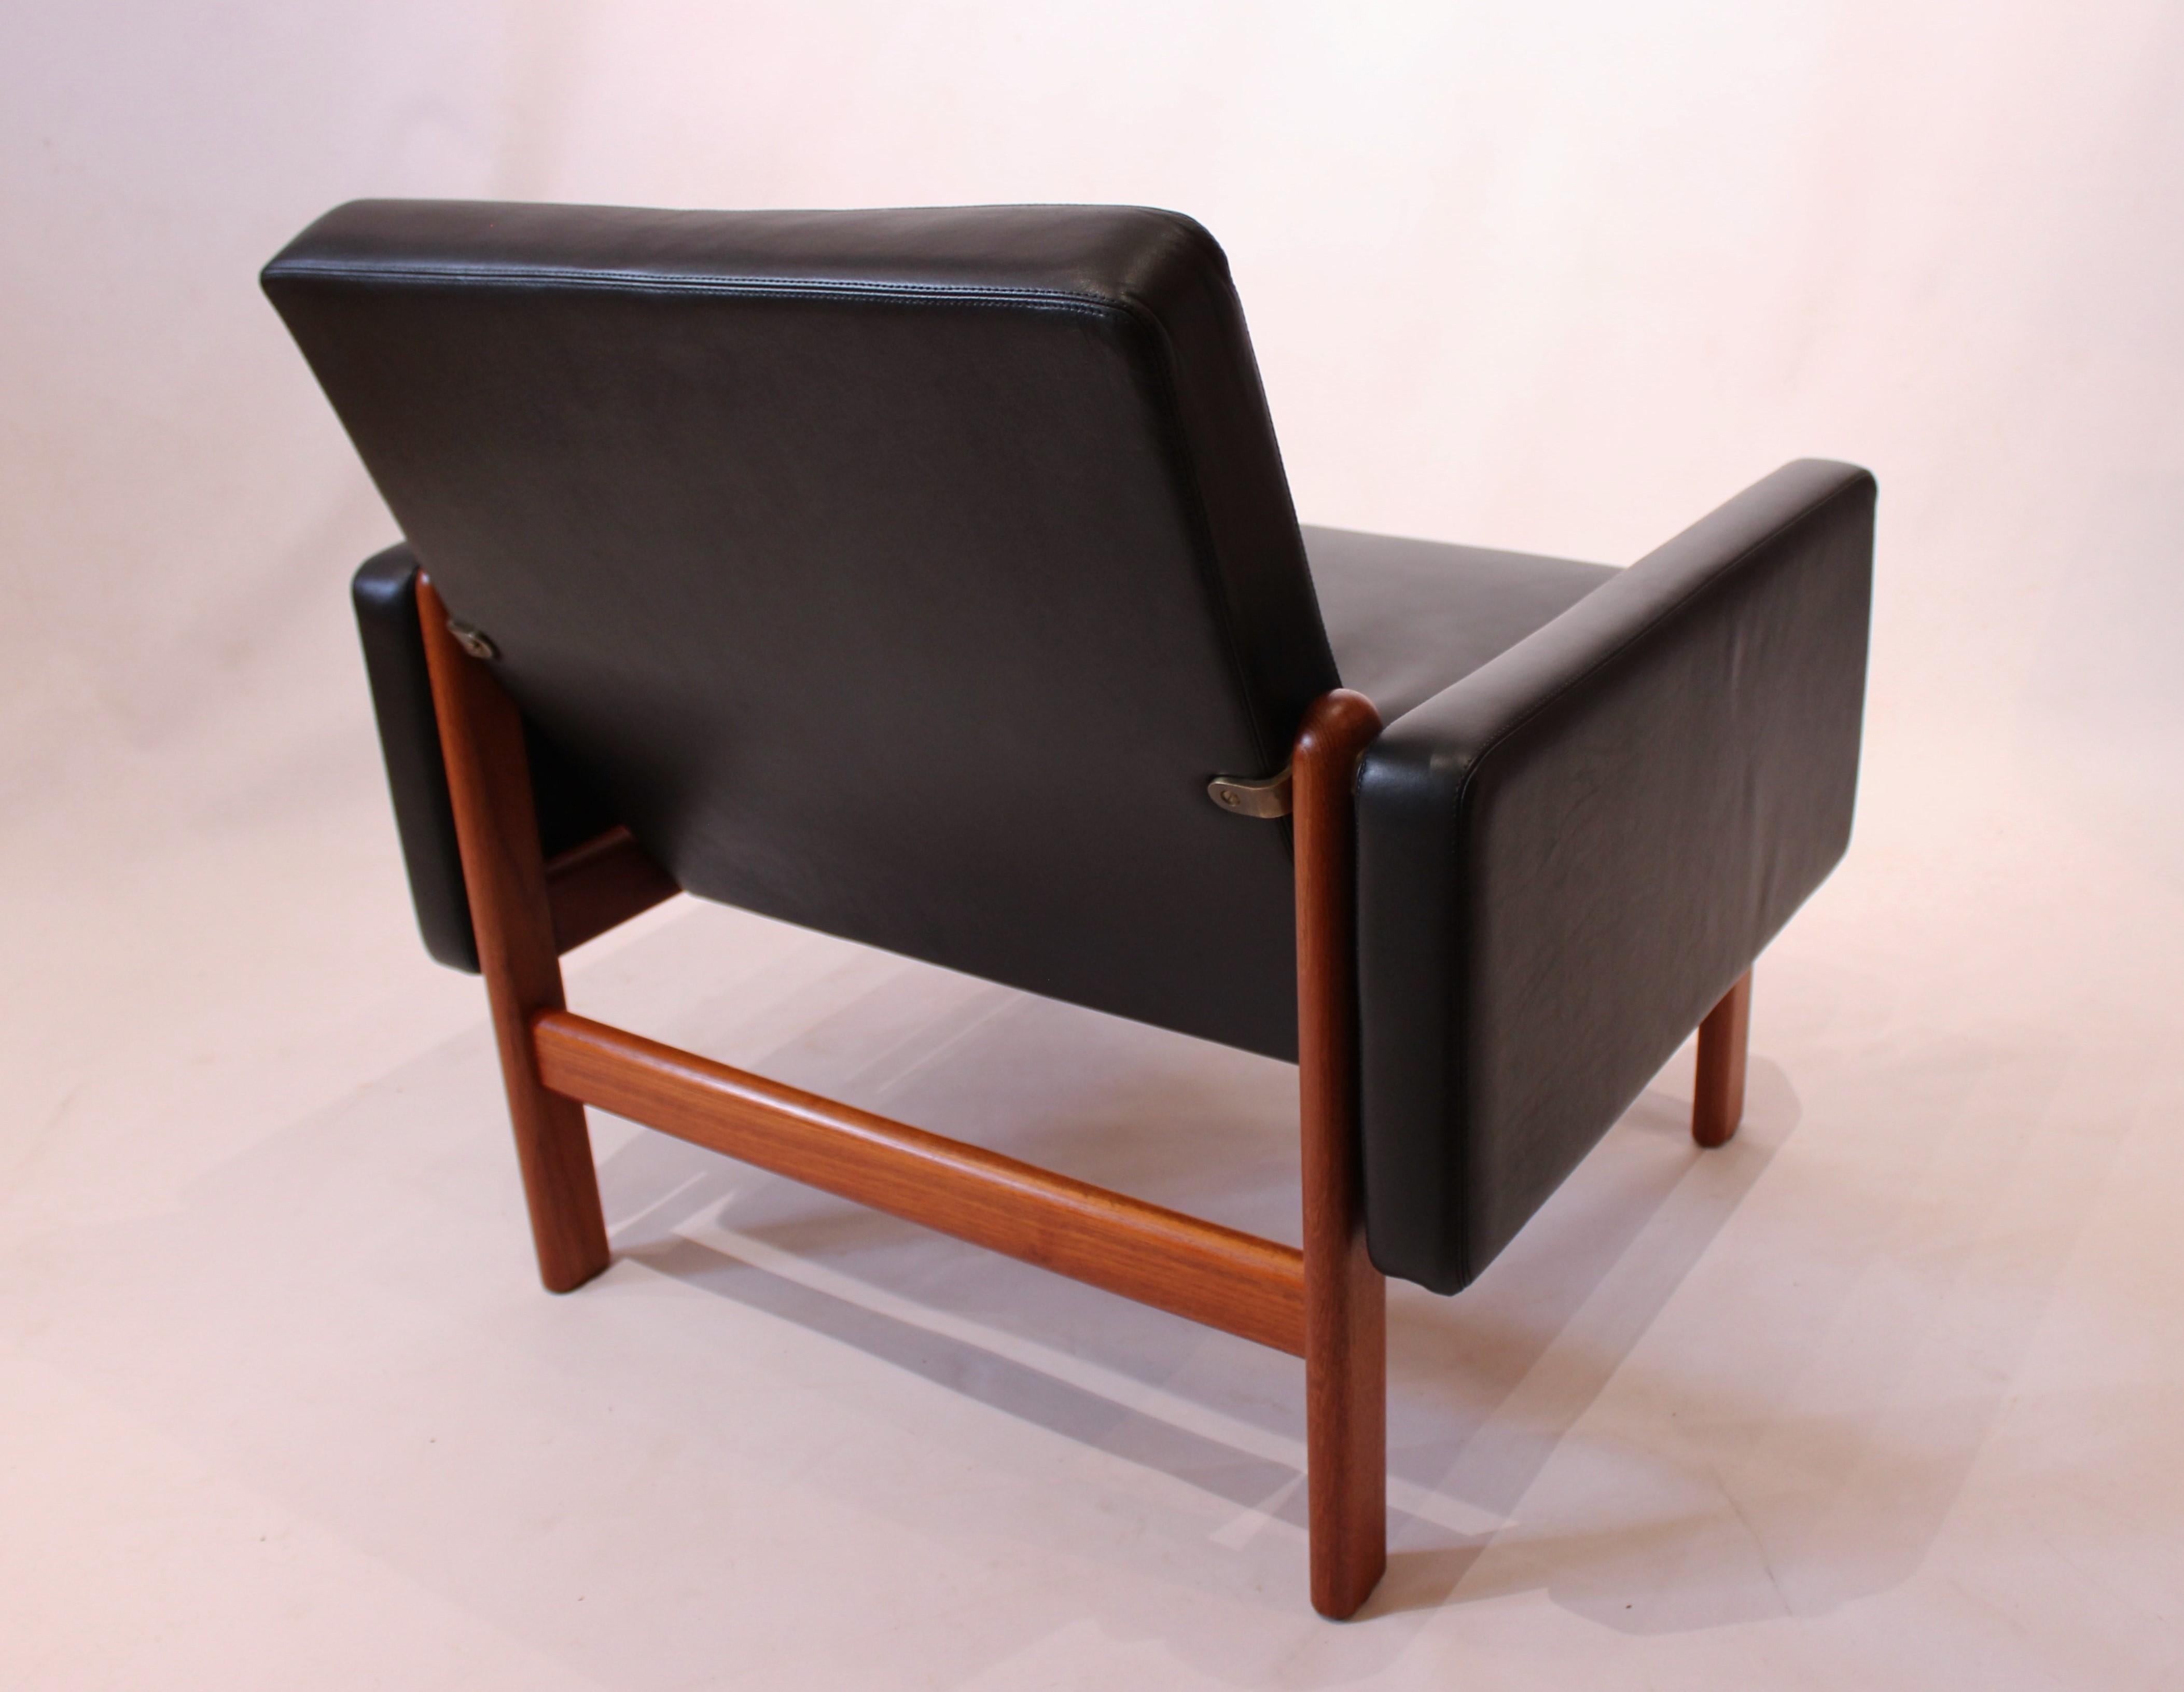 Scandinavian Modern Teak Easy Chair with Stool, by Jørgen Bækmark and FDB, 1960s In Good Condition For Sale In Lejre, DK